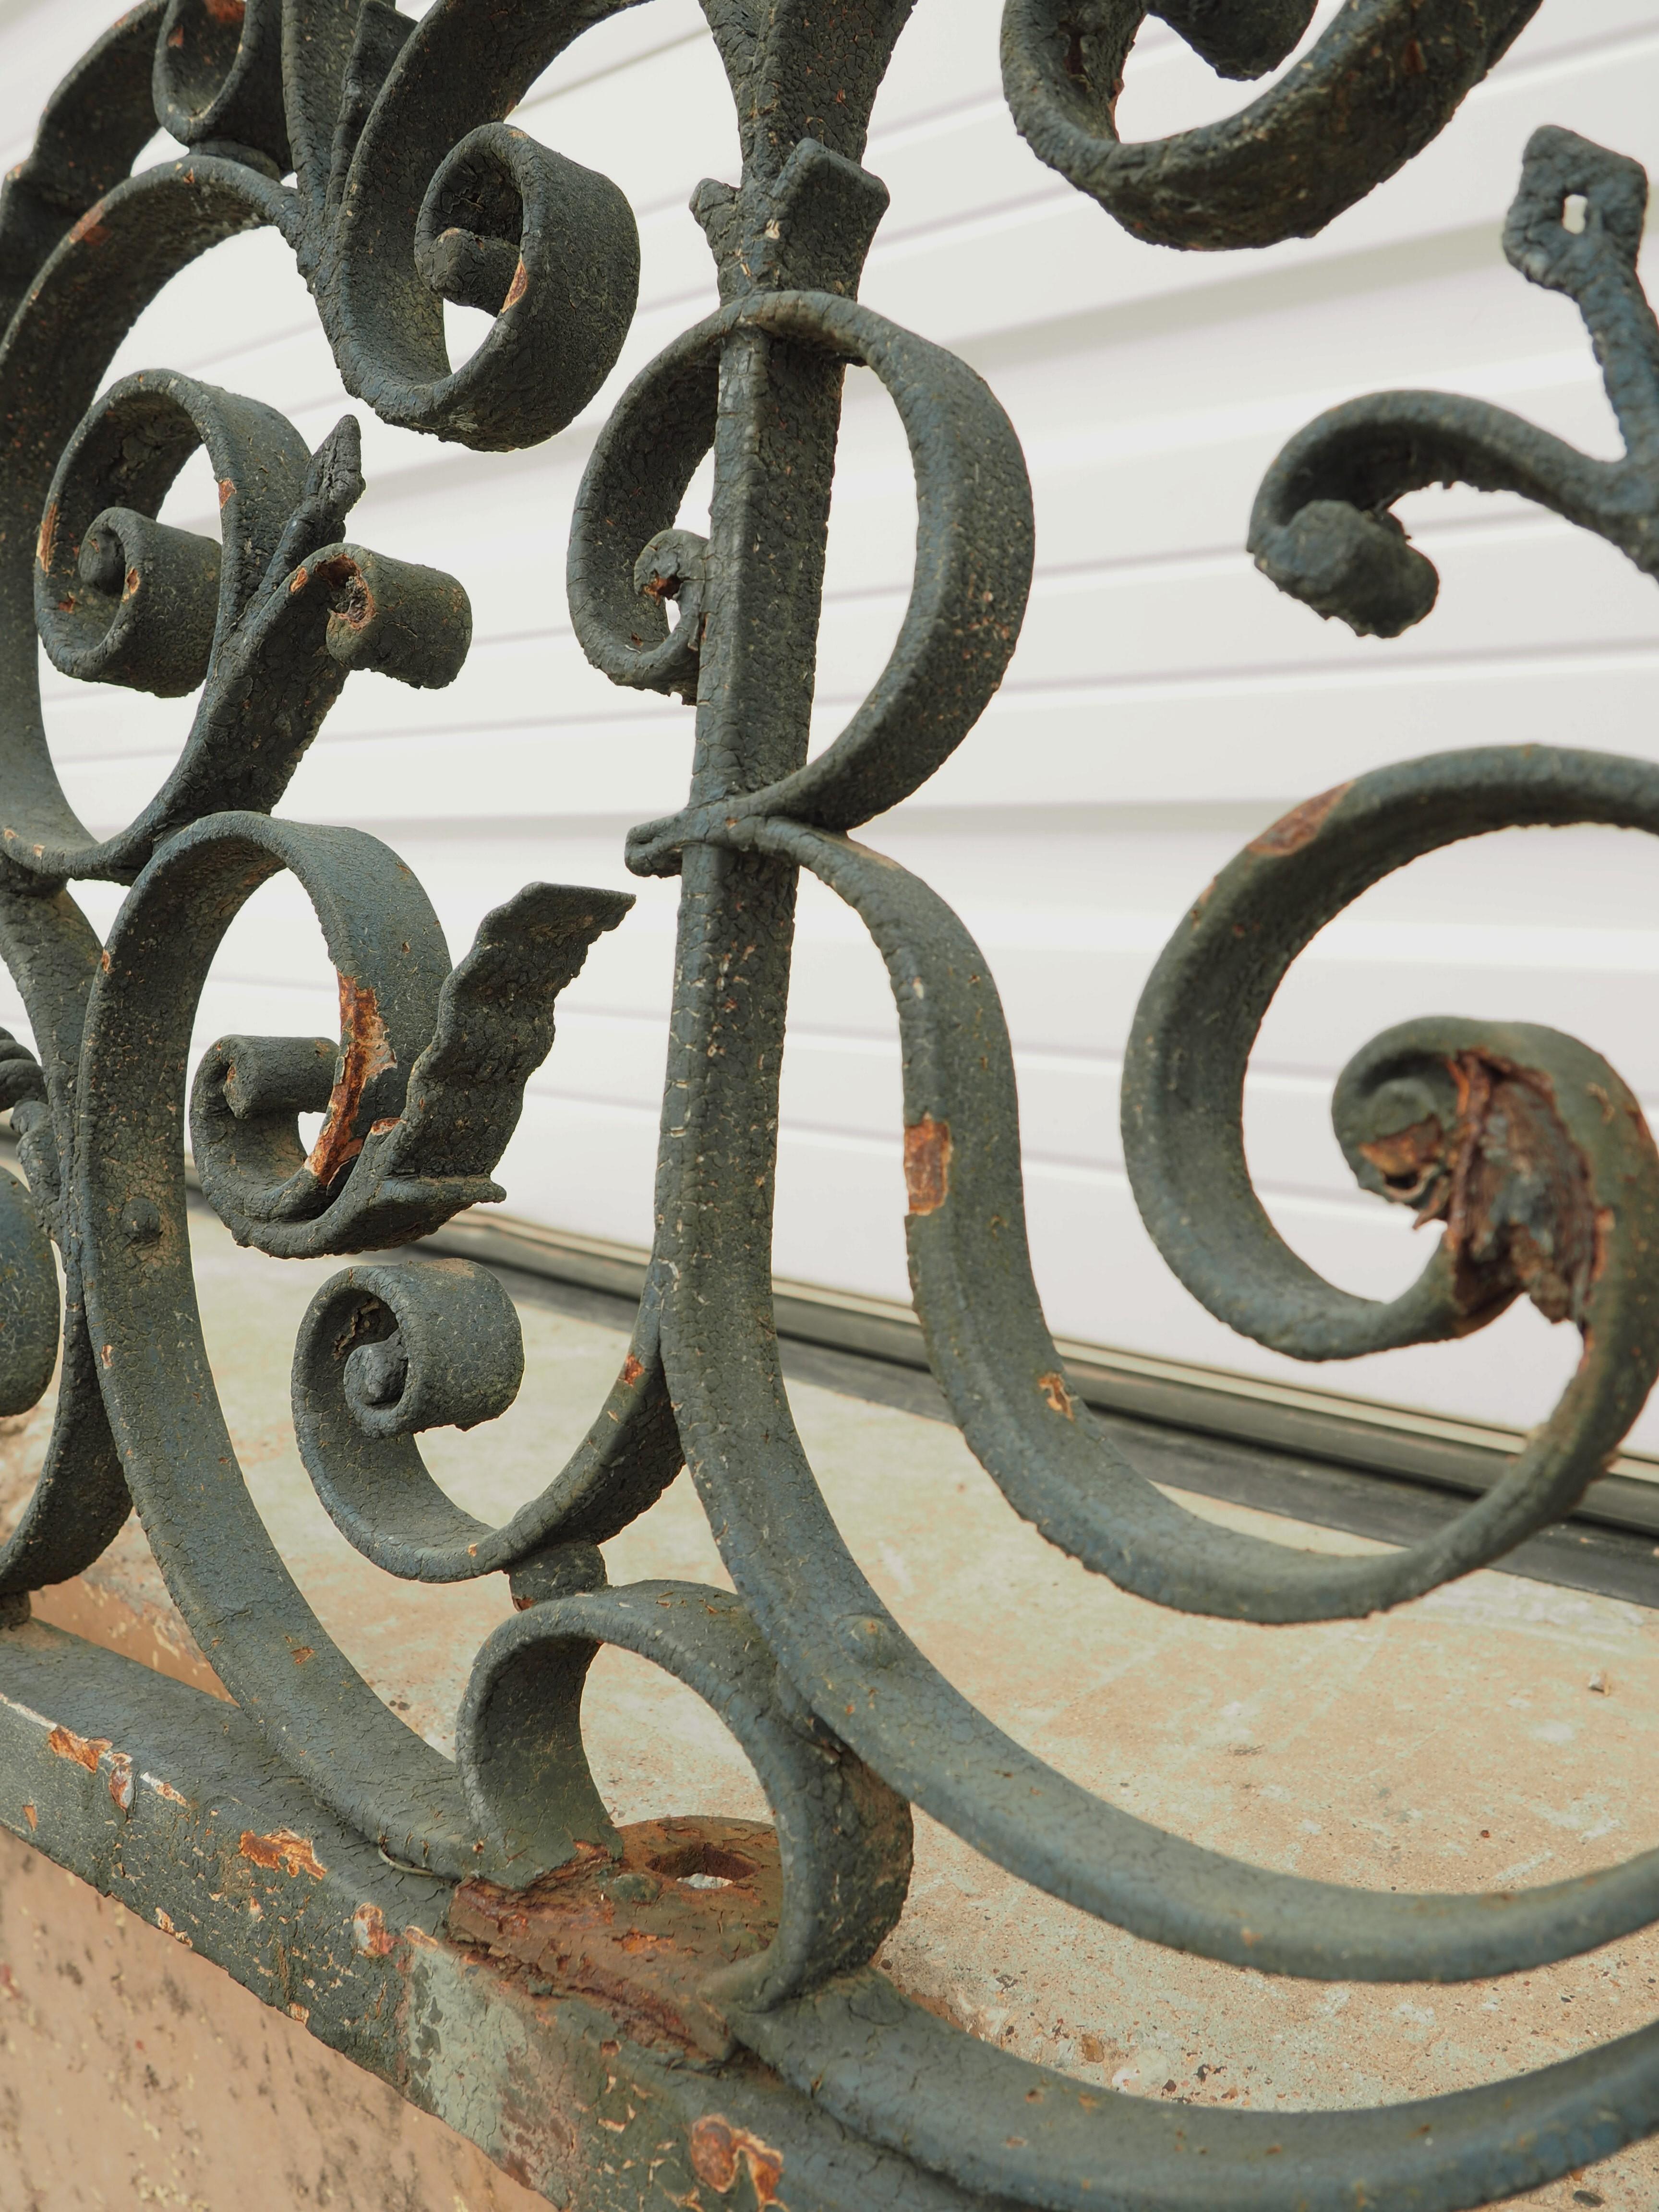 Standing at almost seven feet tall and over 12 feet wide, this wrought iron gate transom is quite impressive. A transom is a horizontal architectural element, in this case, one that would have gone above a gate opening. The iron, which has been